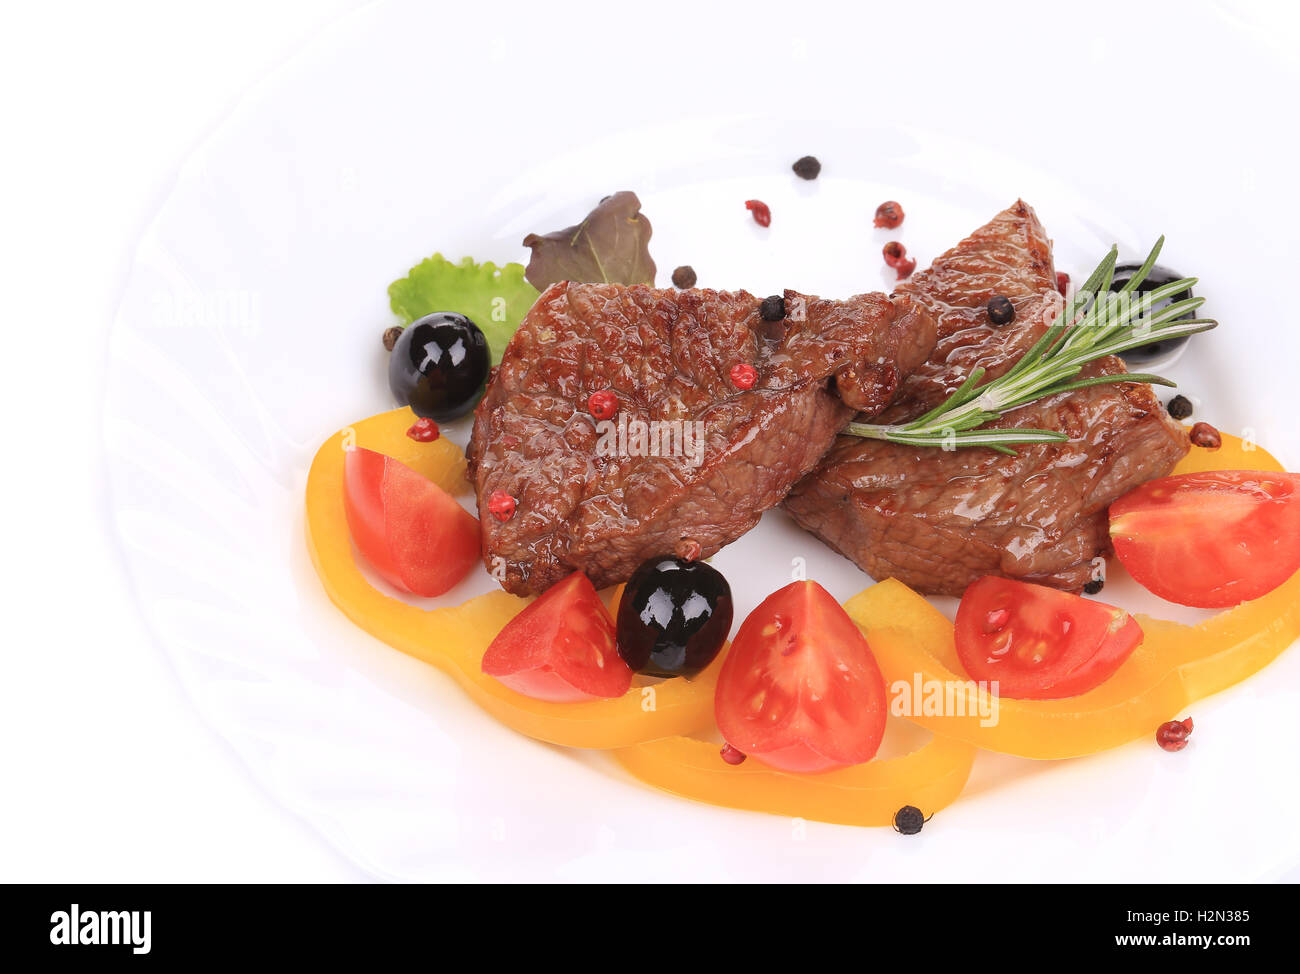 Grilled steak with fresh vegetables. Stock Photo